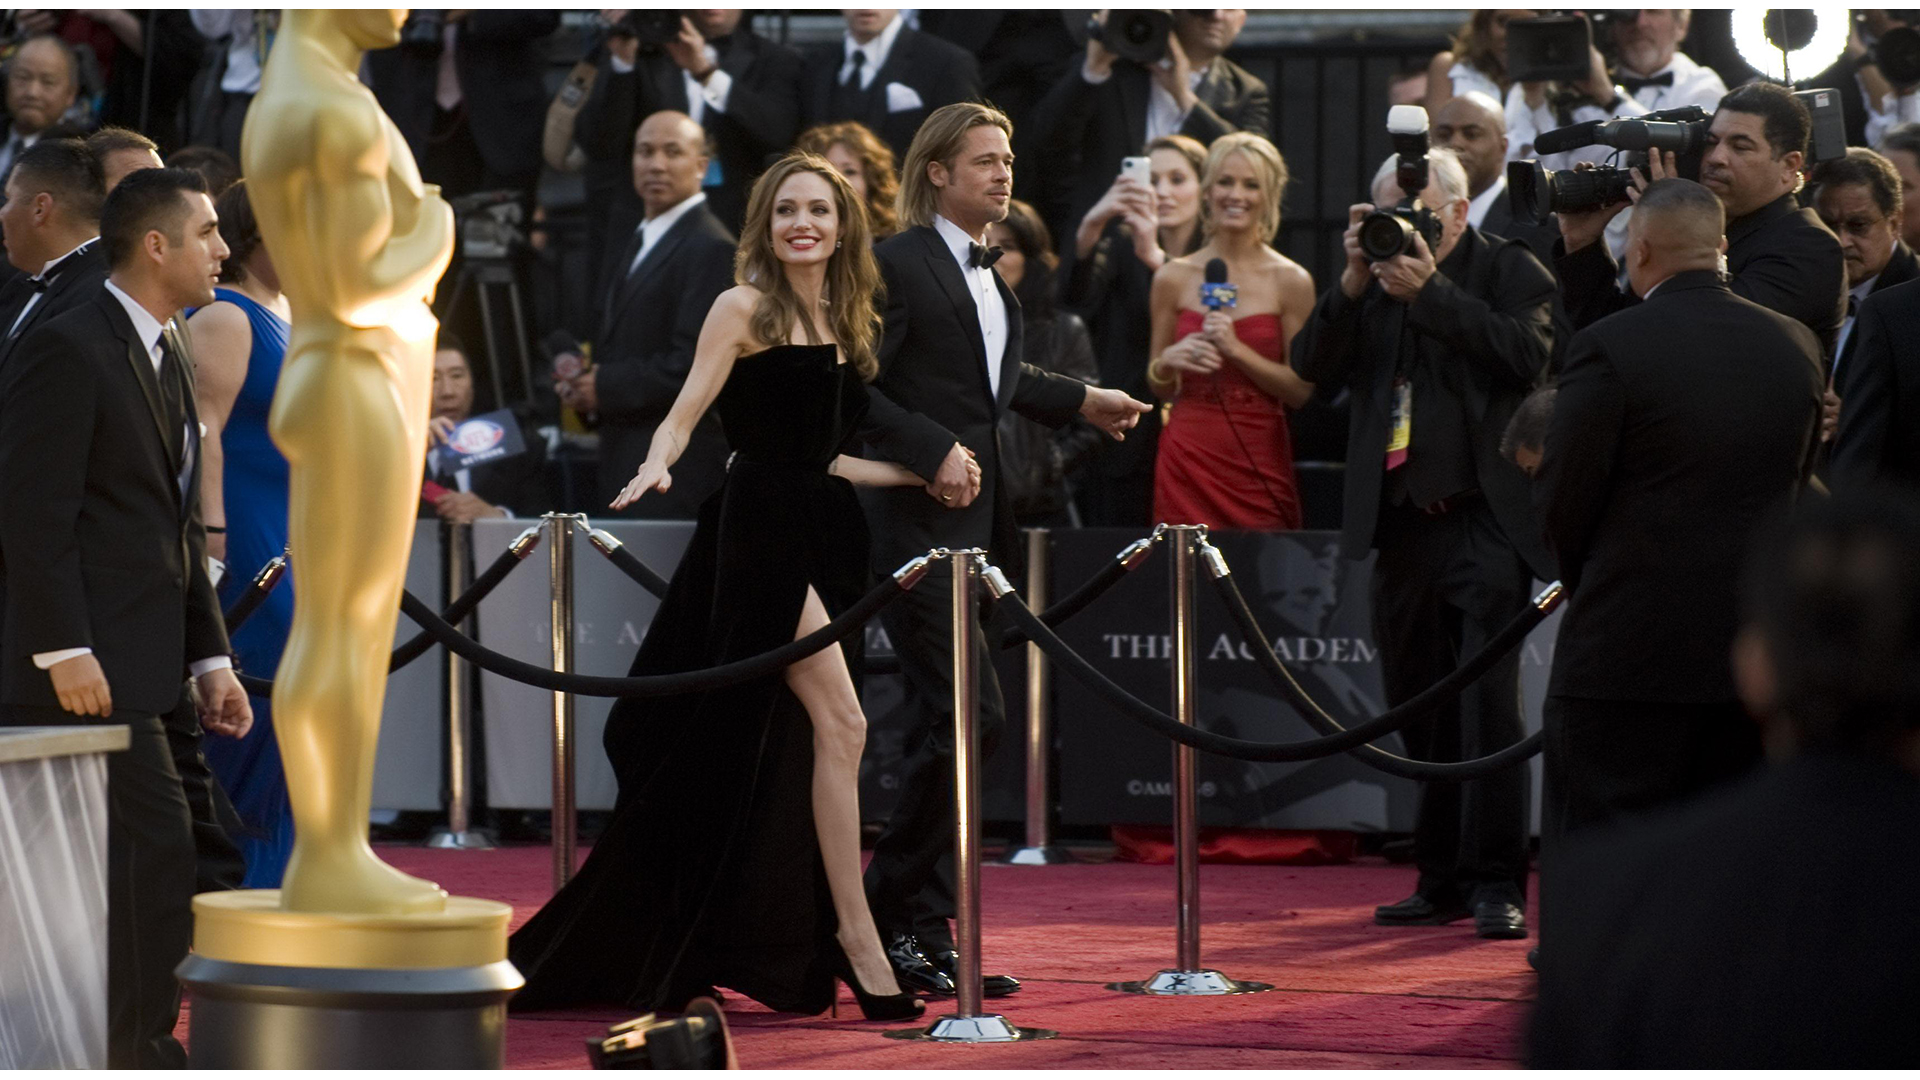 The Oscars: 10 Times Kisses, Falls, and Jolie's Leg Stole the Show